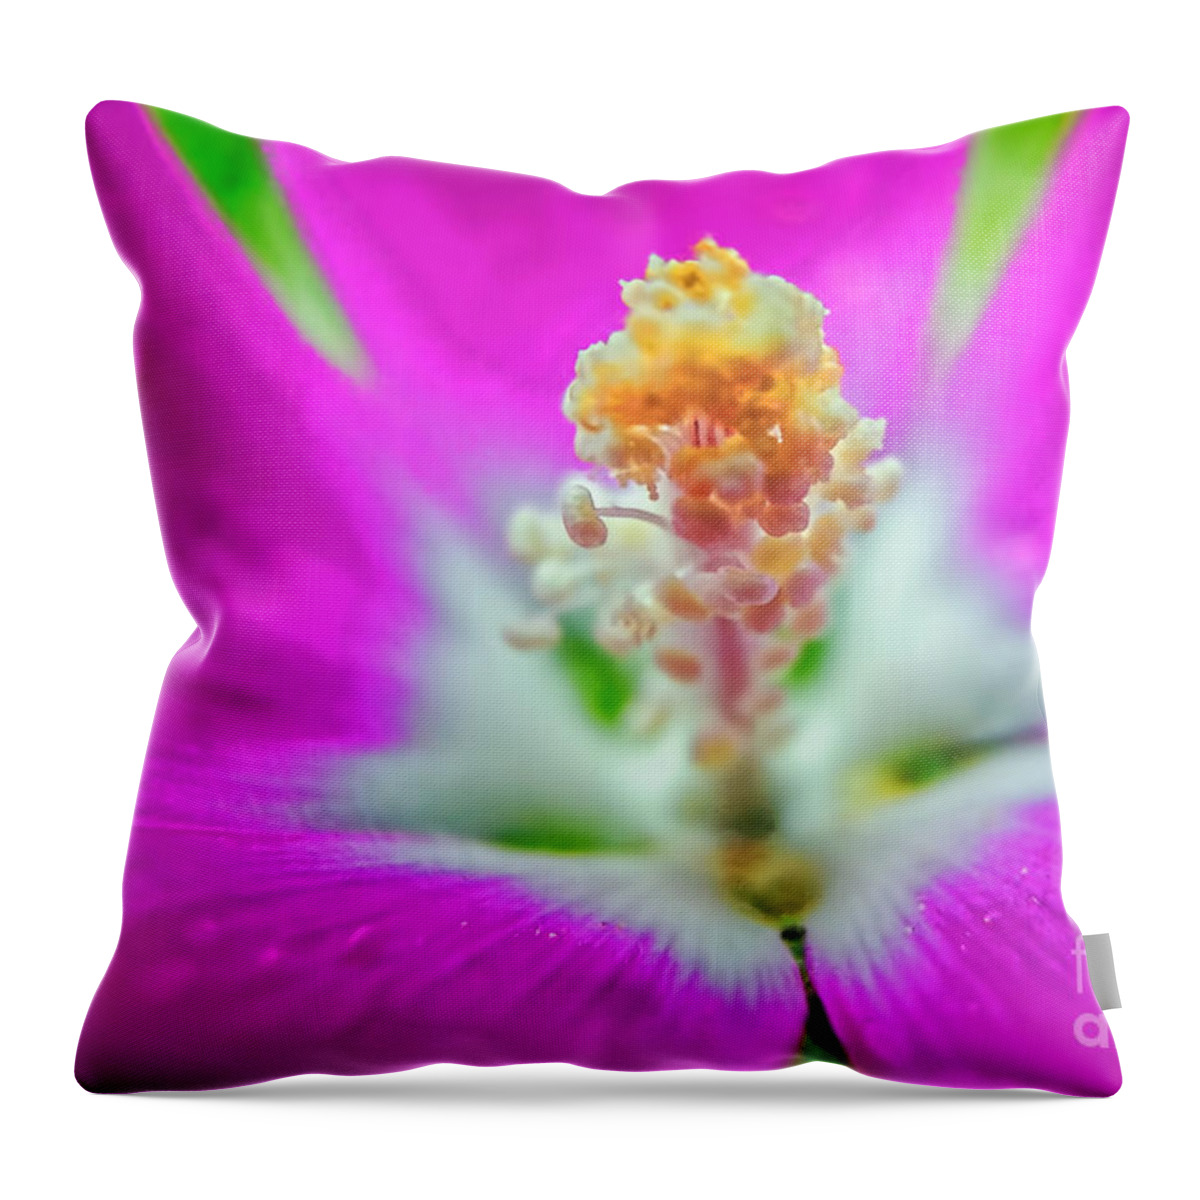 Drink It In Throw Pillow featuring the photograph Drinking It In by Gary Holmes